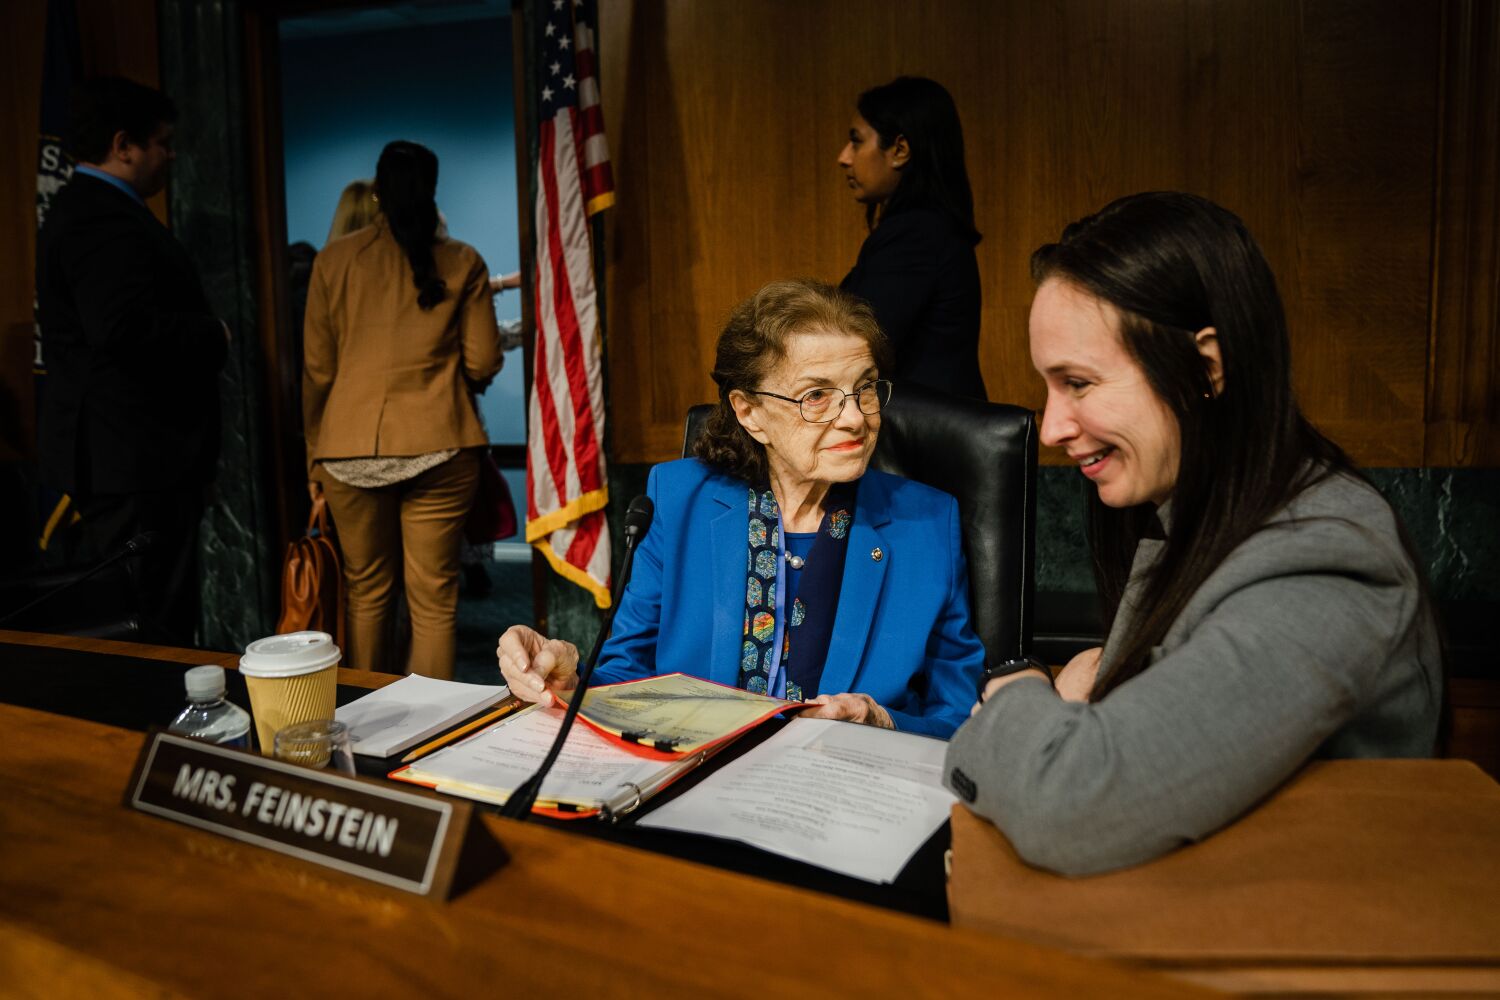 A frail Sen. Dianne Feinstein continues to vote as new details emerge about her health